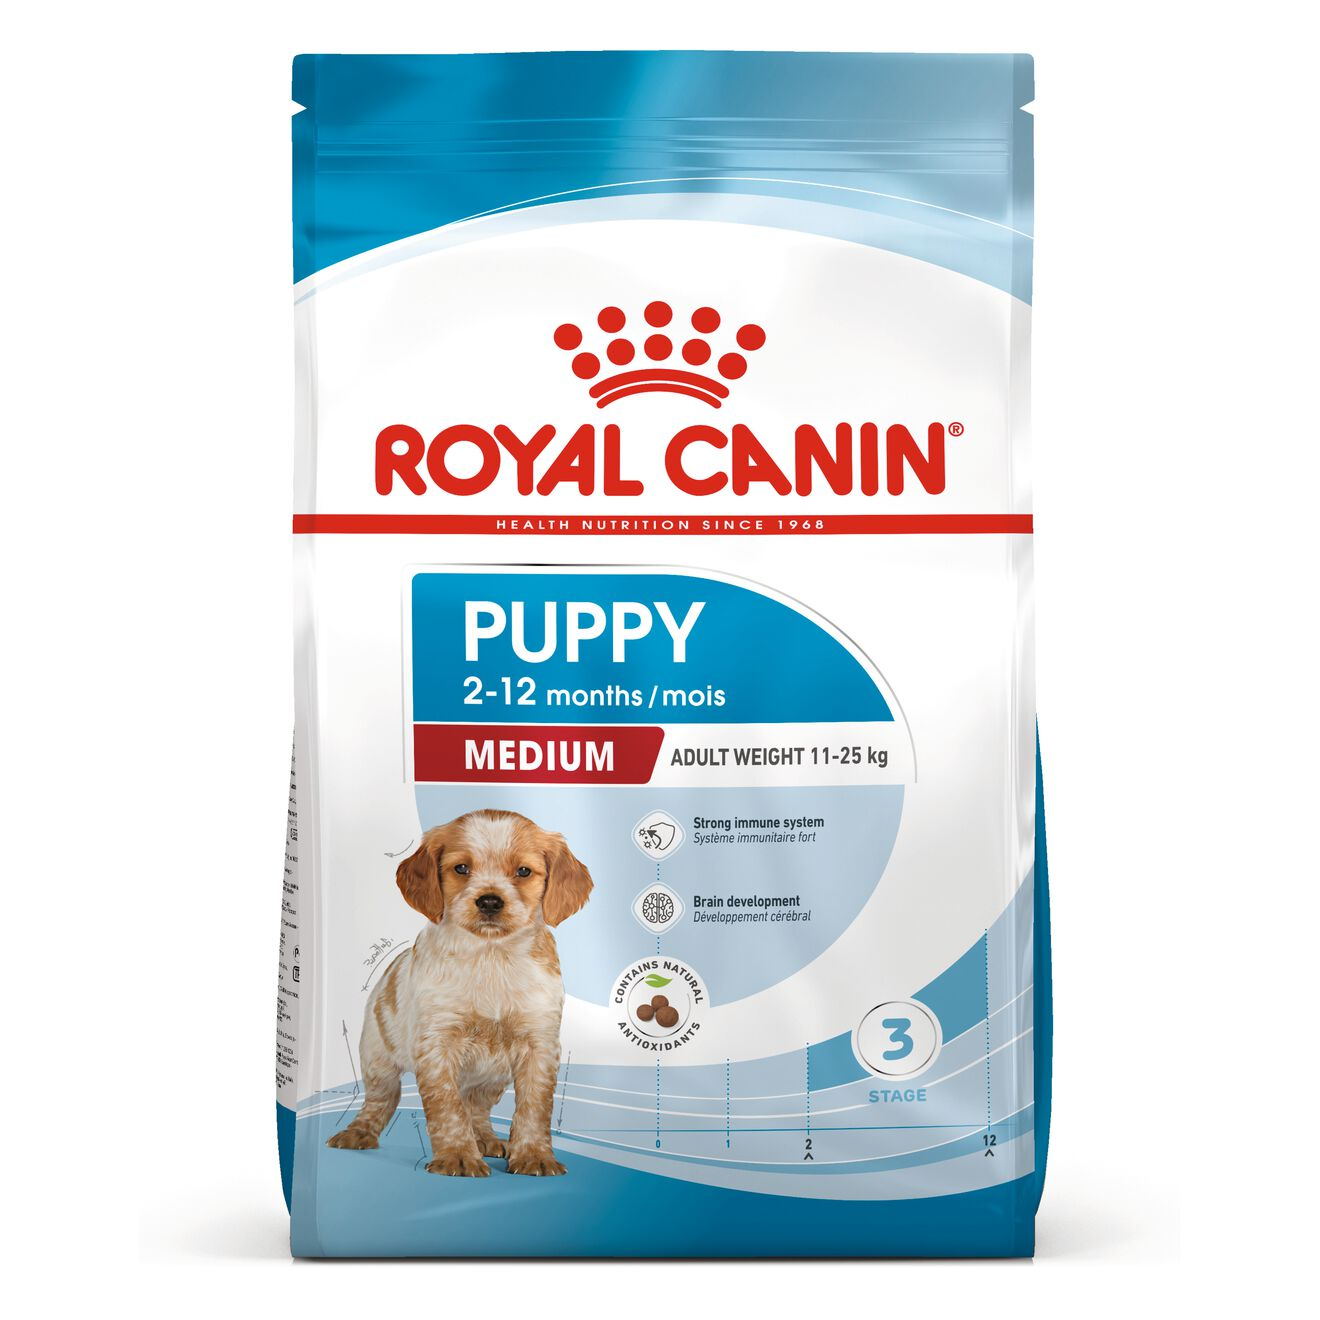 which royal canin for beagle puppy?